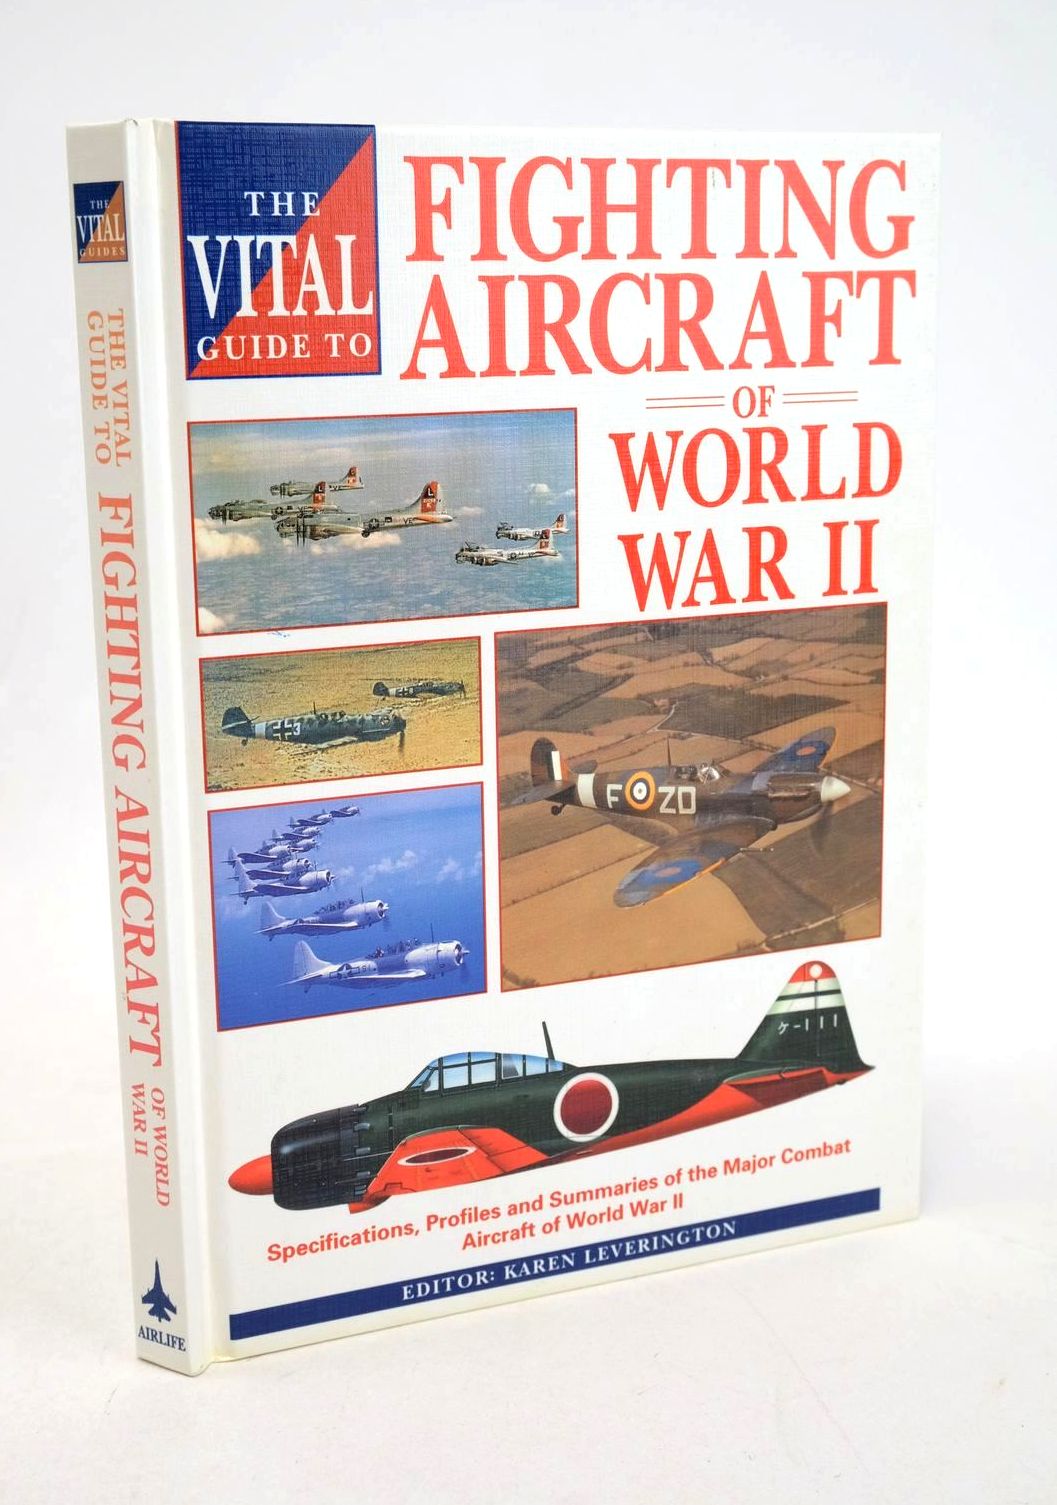 Photo of THE VITAL GUIDE TO FIGHTING AIRCRAFT OF WORLD WAR II written by Leverington, Karen published by Airlife Publishing Ltd (STOCK CODE: 1327486)  for sale by Stella & Rose's Books